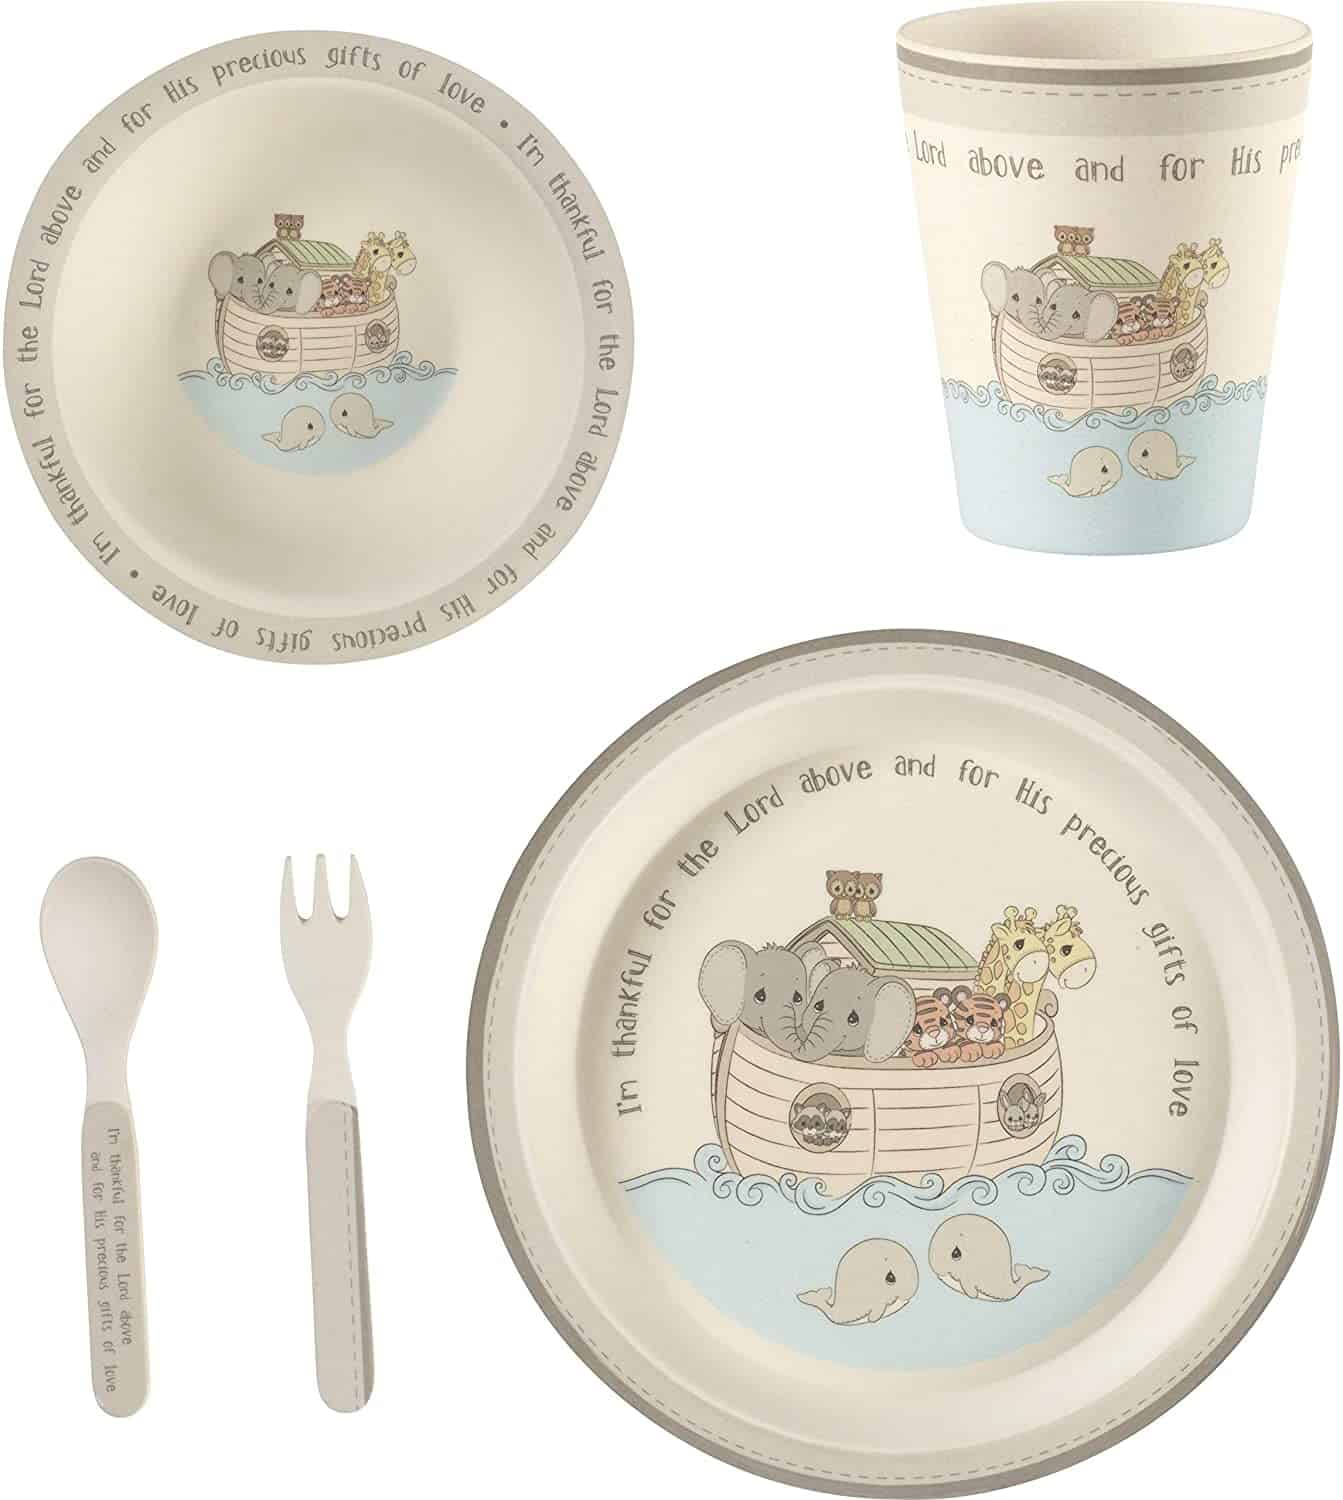 Noah's Ark Dinnerware Set with bowls, glass, spoon and fork